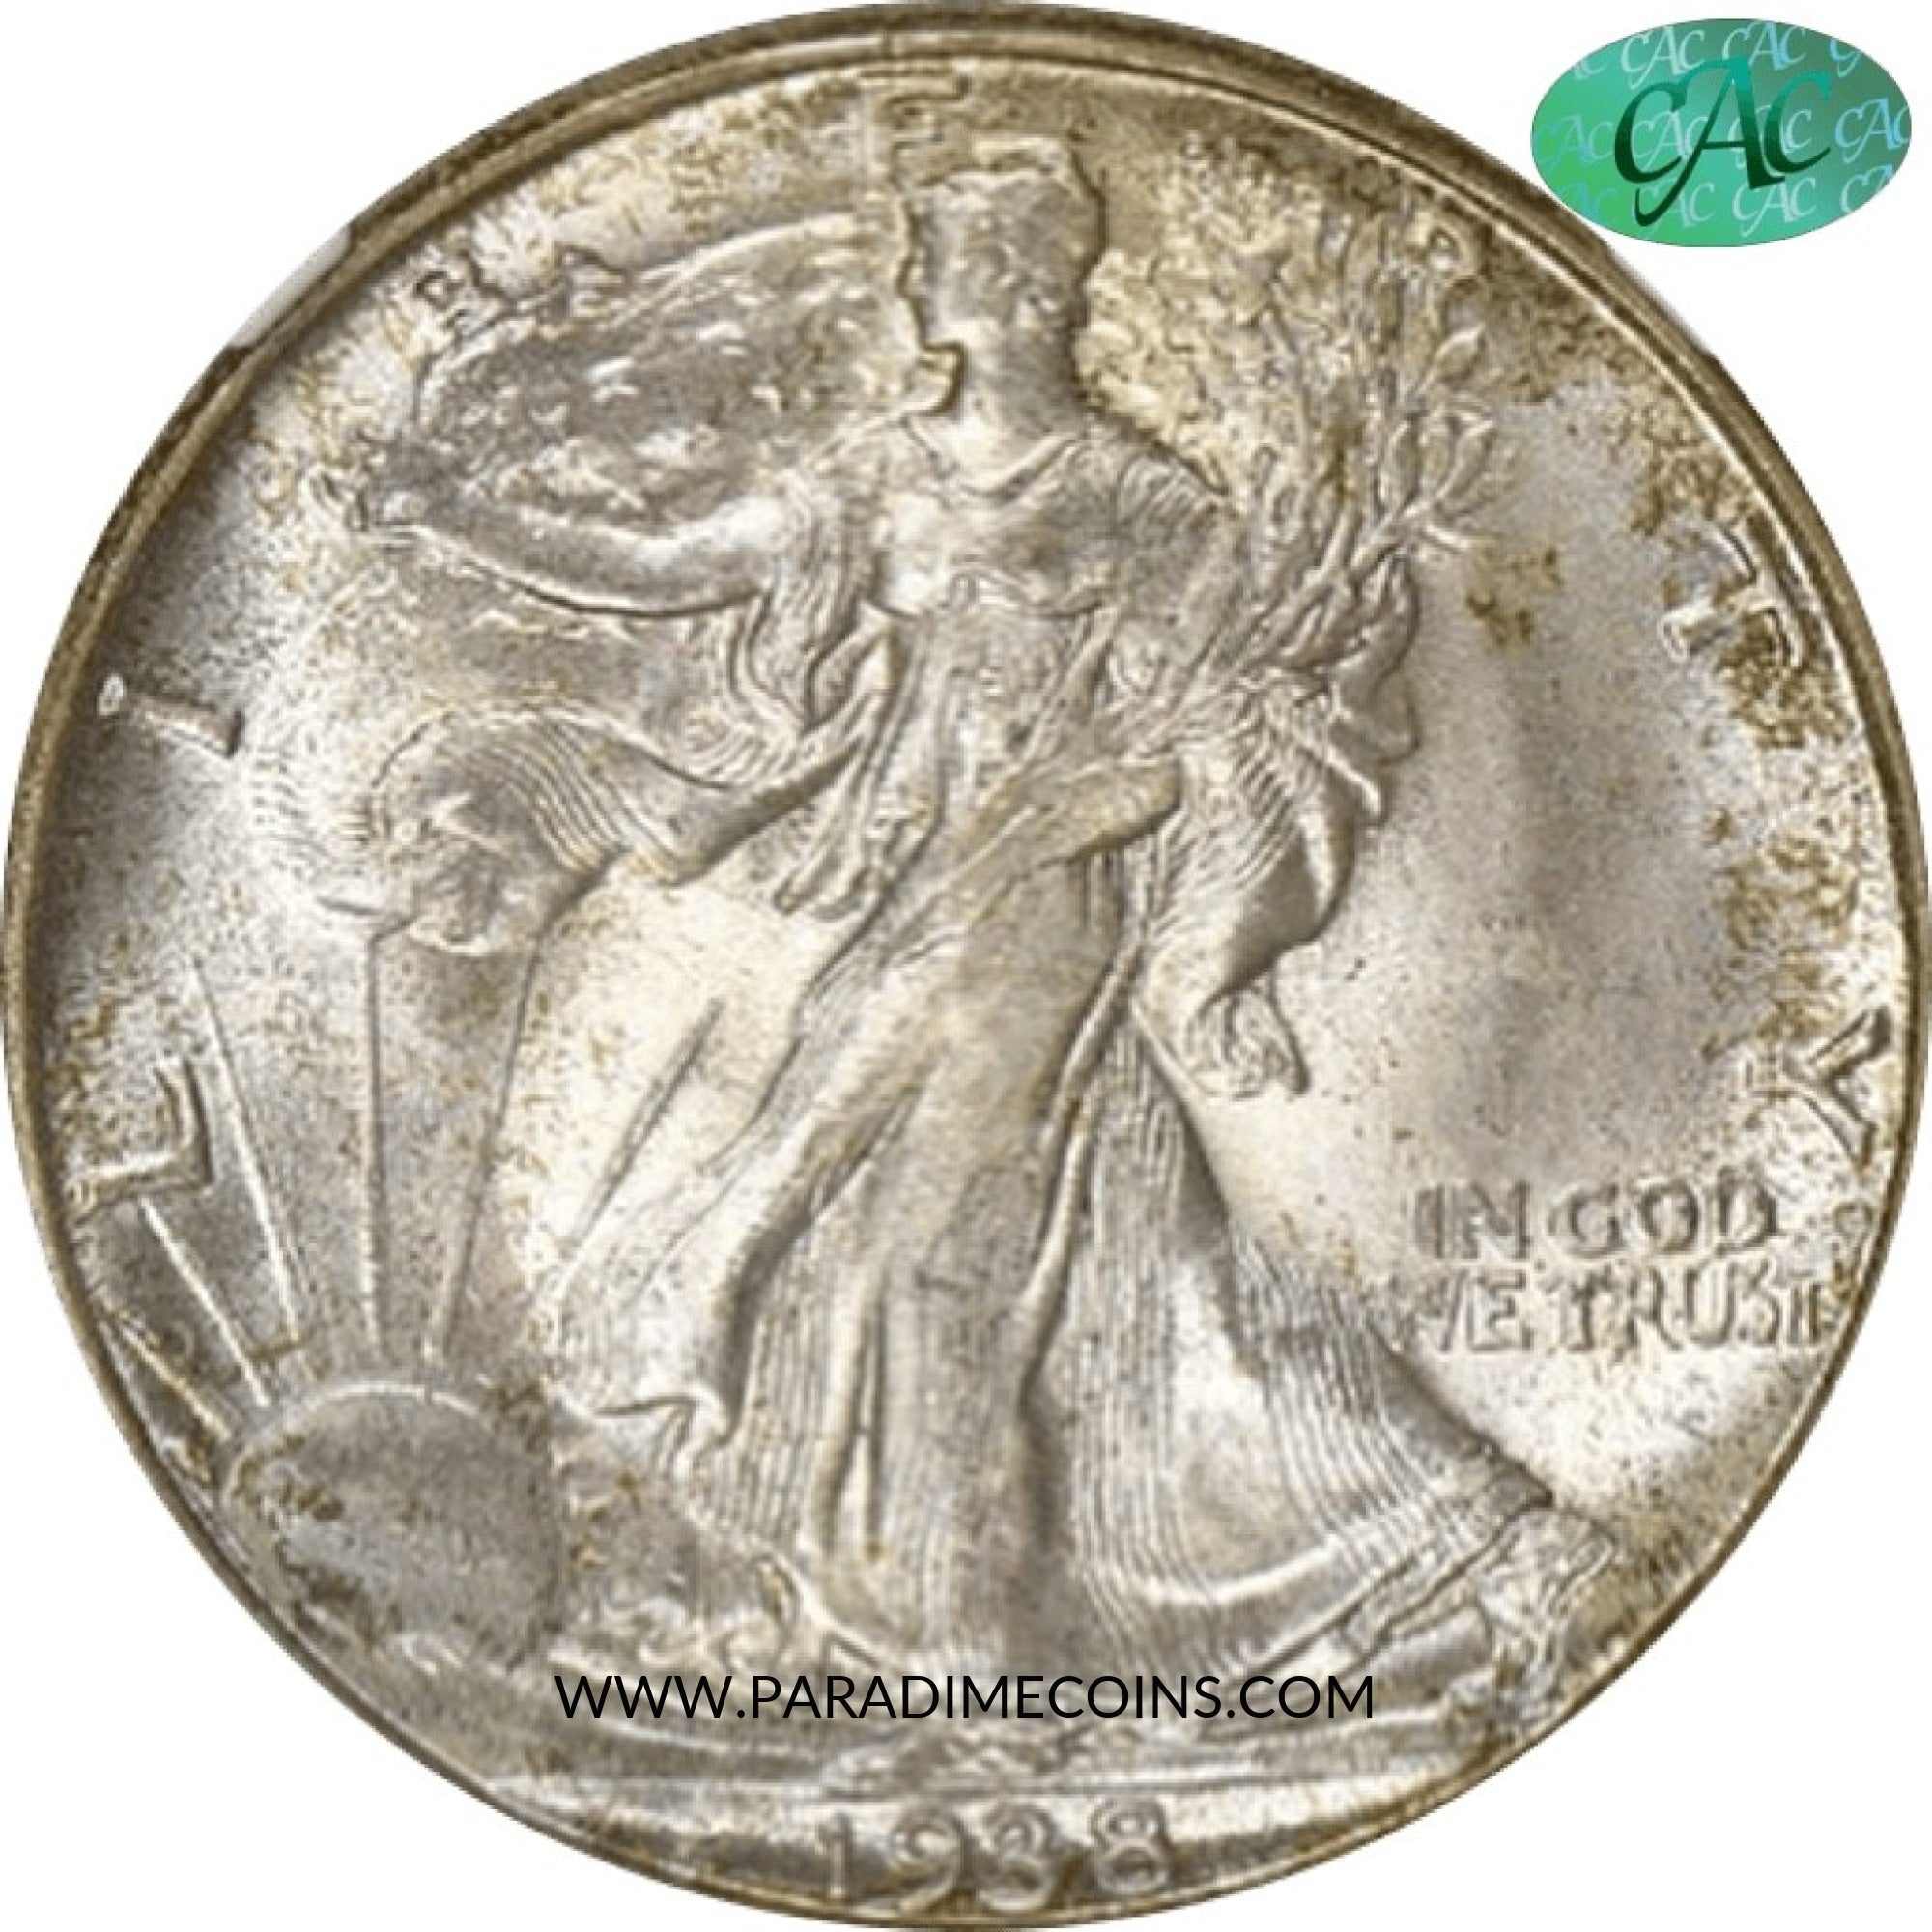 1938-D 50C MS67+ NGC CAC - Paradime Coins | PCGS NGC CACG CAC Rare US Numismatic Coins For Sale